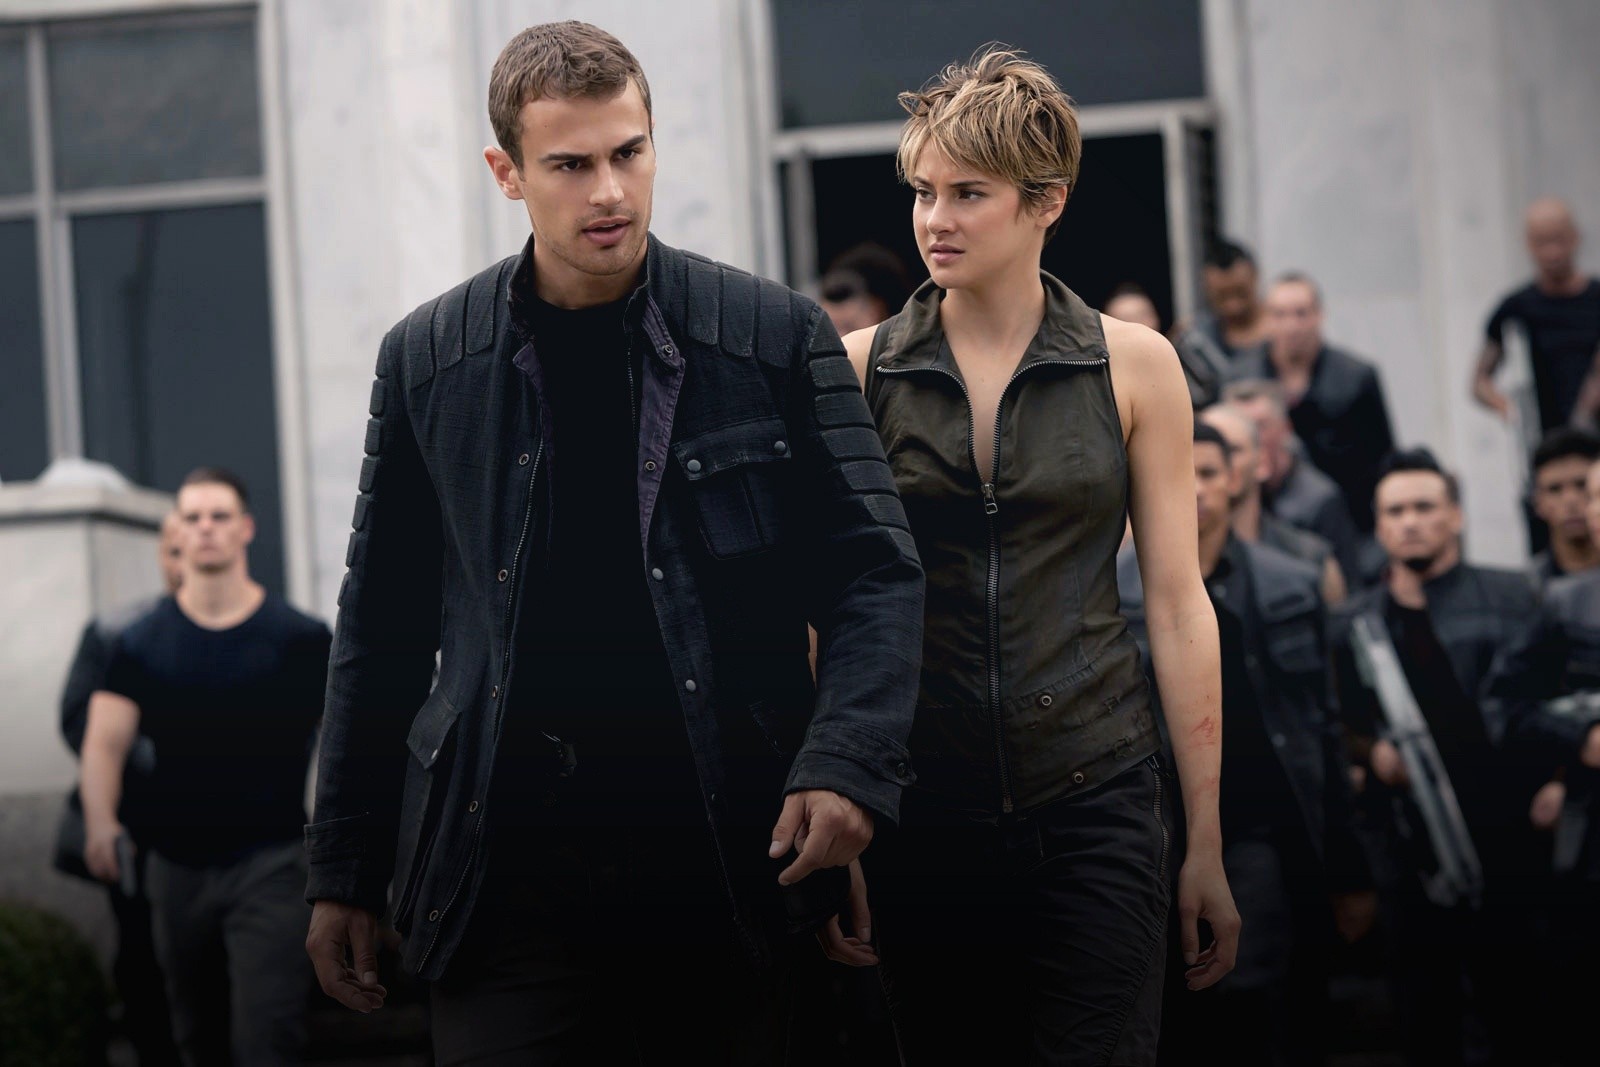 Theo James stars as Four and Shailene Woodley stars as Beatrice 'Tris' Prior in Summit Entertainment's The Divergent Series: Insurgent (2015). Photo credit by Andrew Cooper.